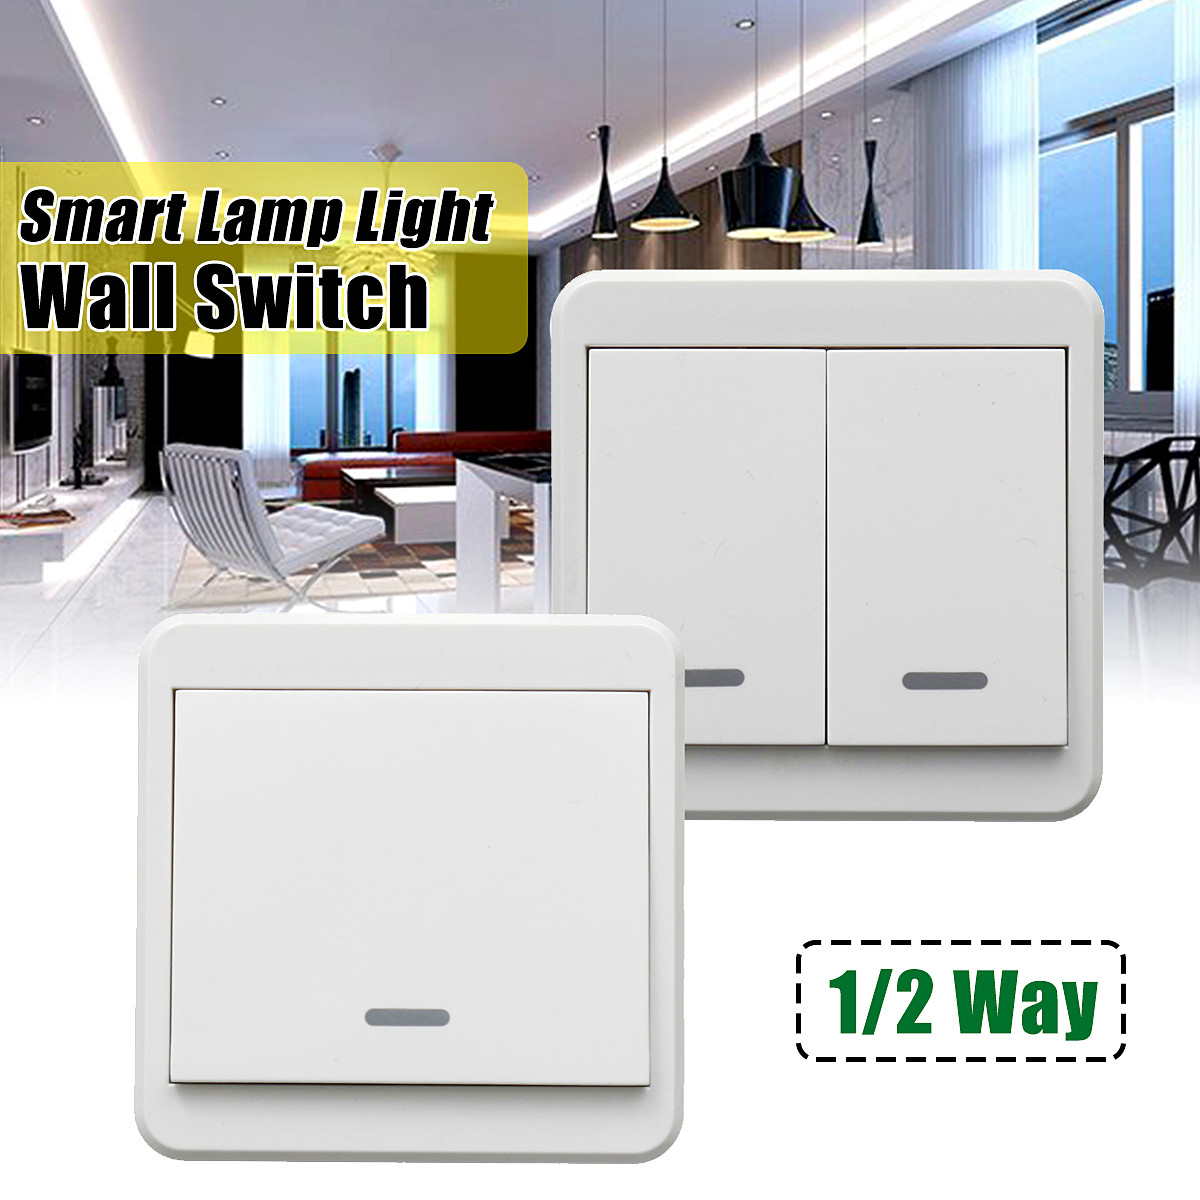 12-Way-Light-Lamp-Wall-Wireless-Remote-Control-Switch-Module-ONOFF--Receiver-1634438